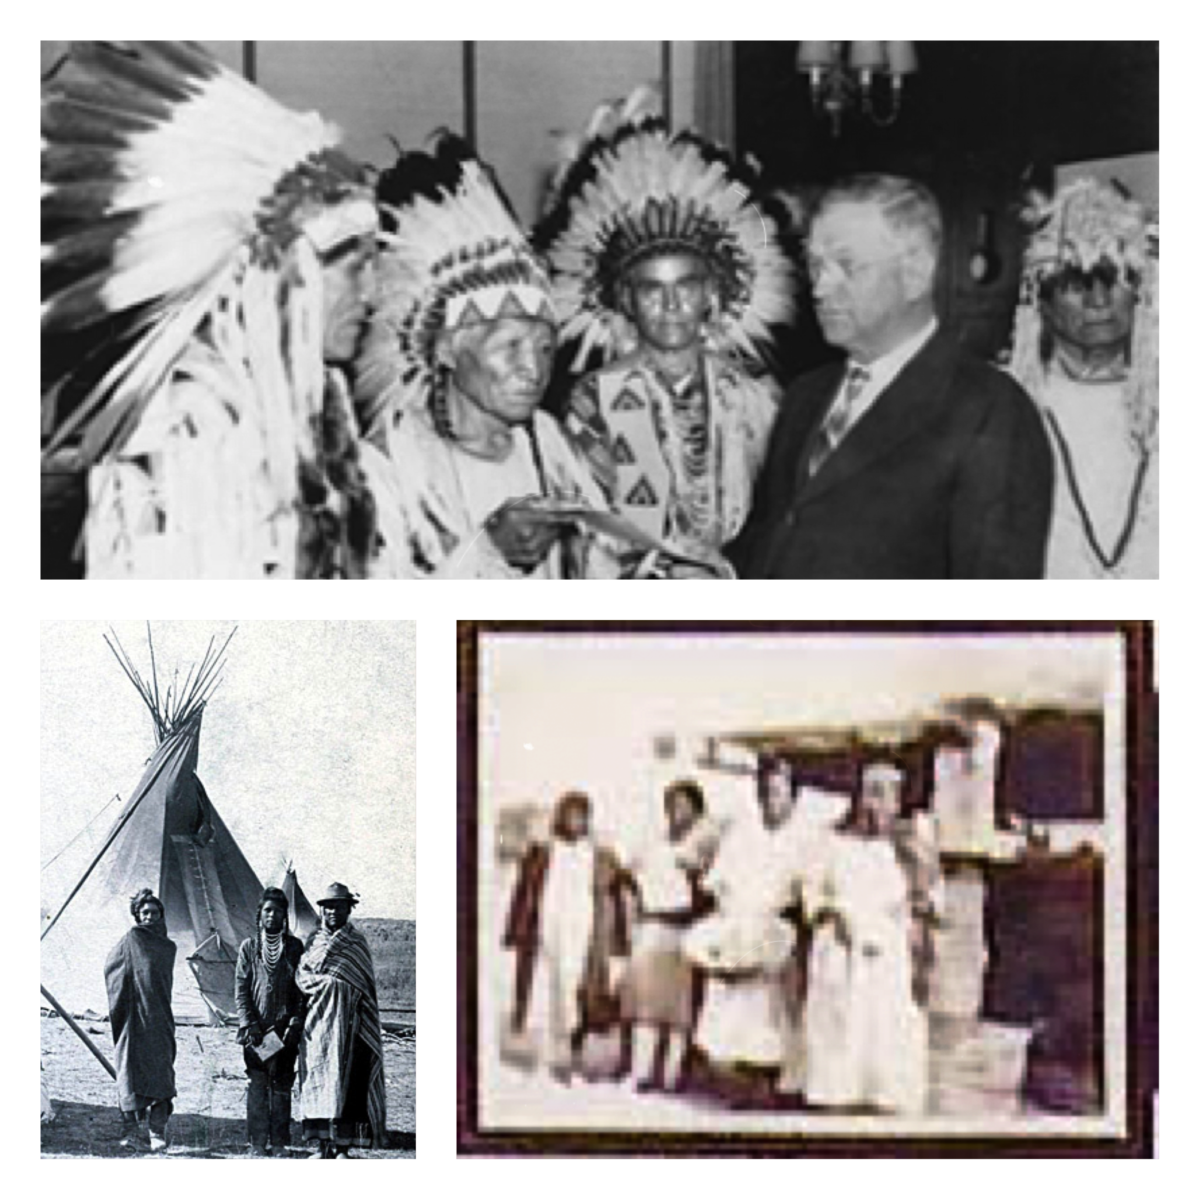 1934 - Establishment of the Ak-Chin Indian Community Tribal Government